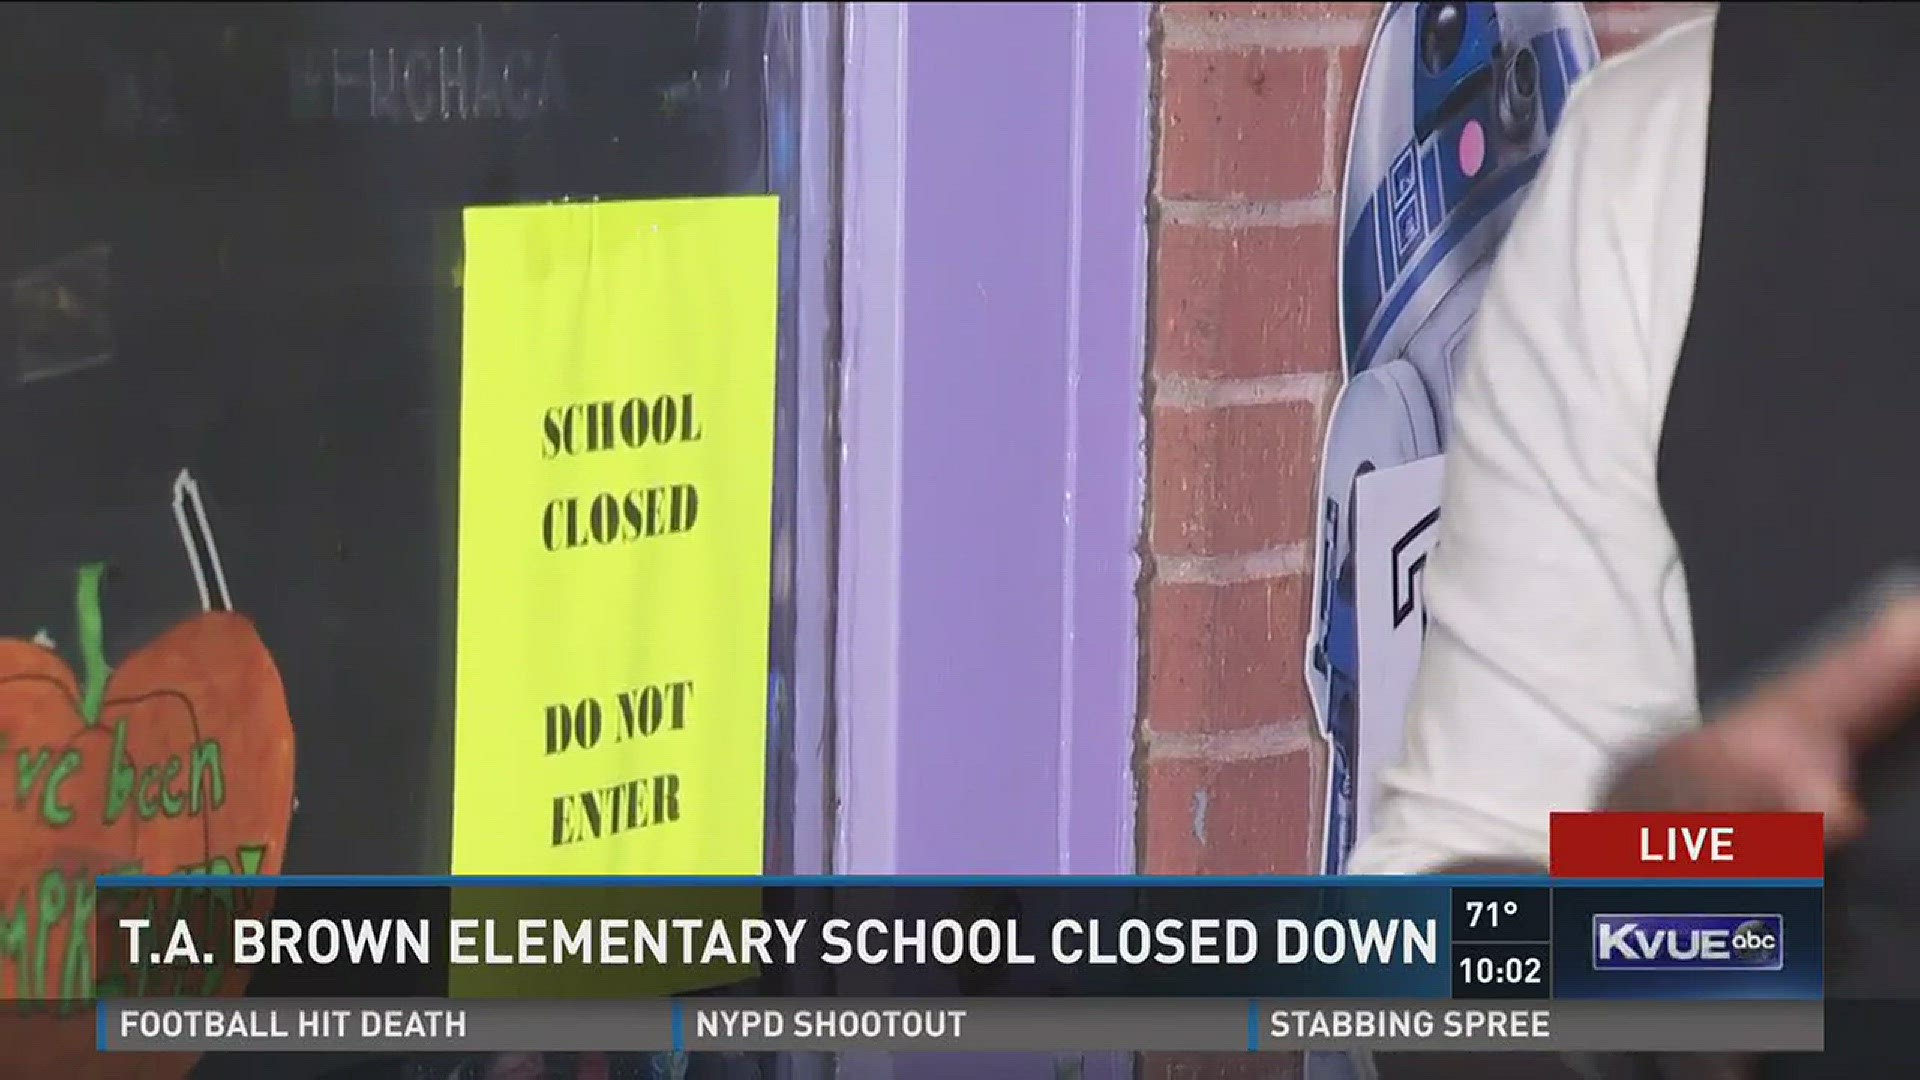 T.A. Brown Elementary School closed down